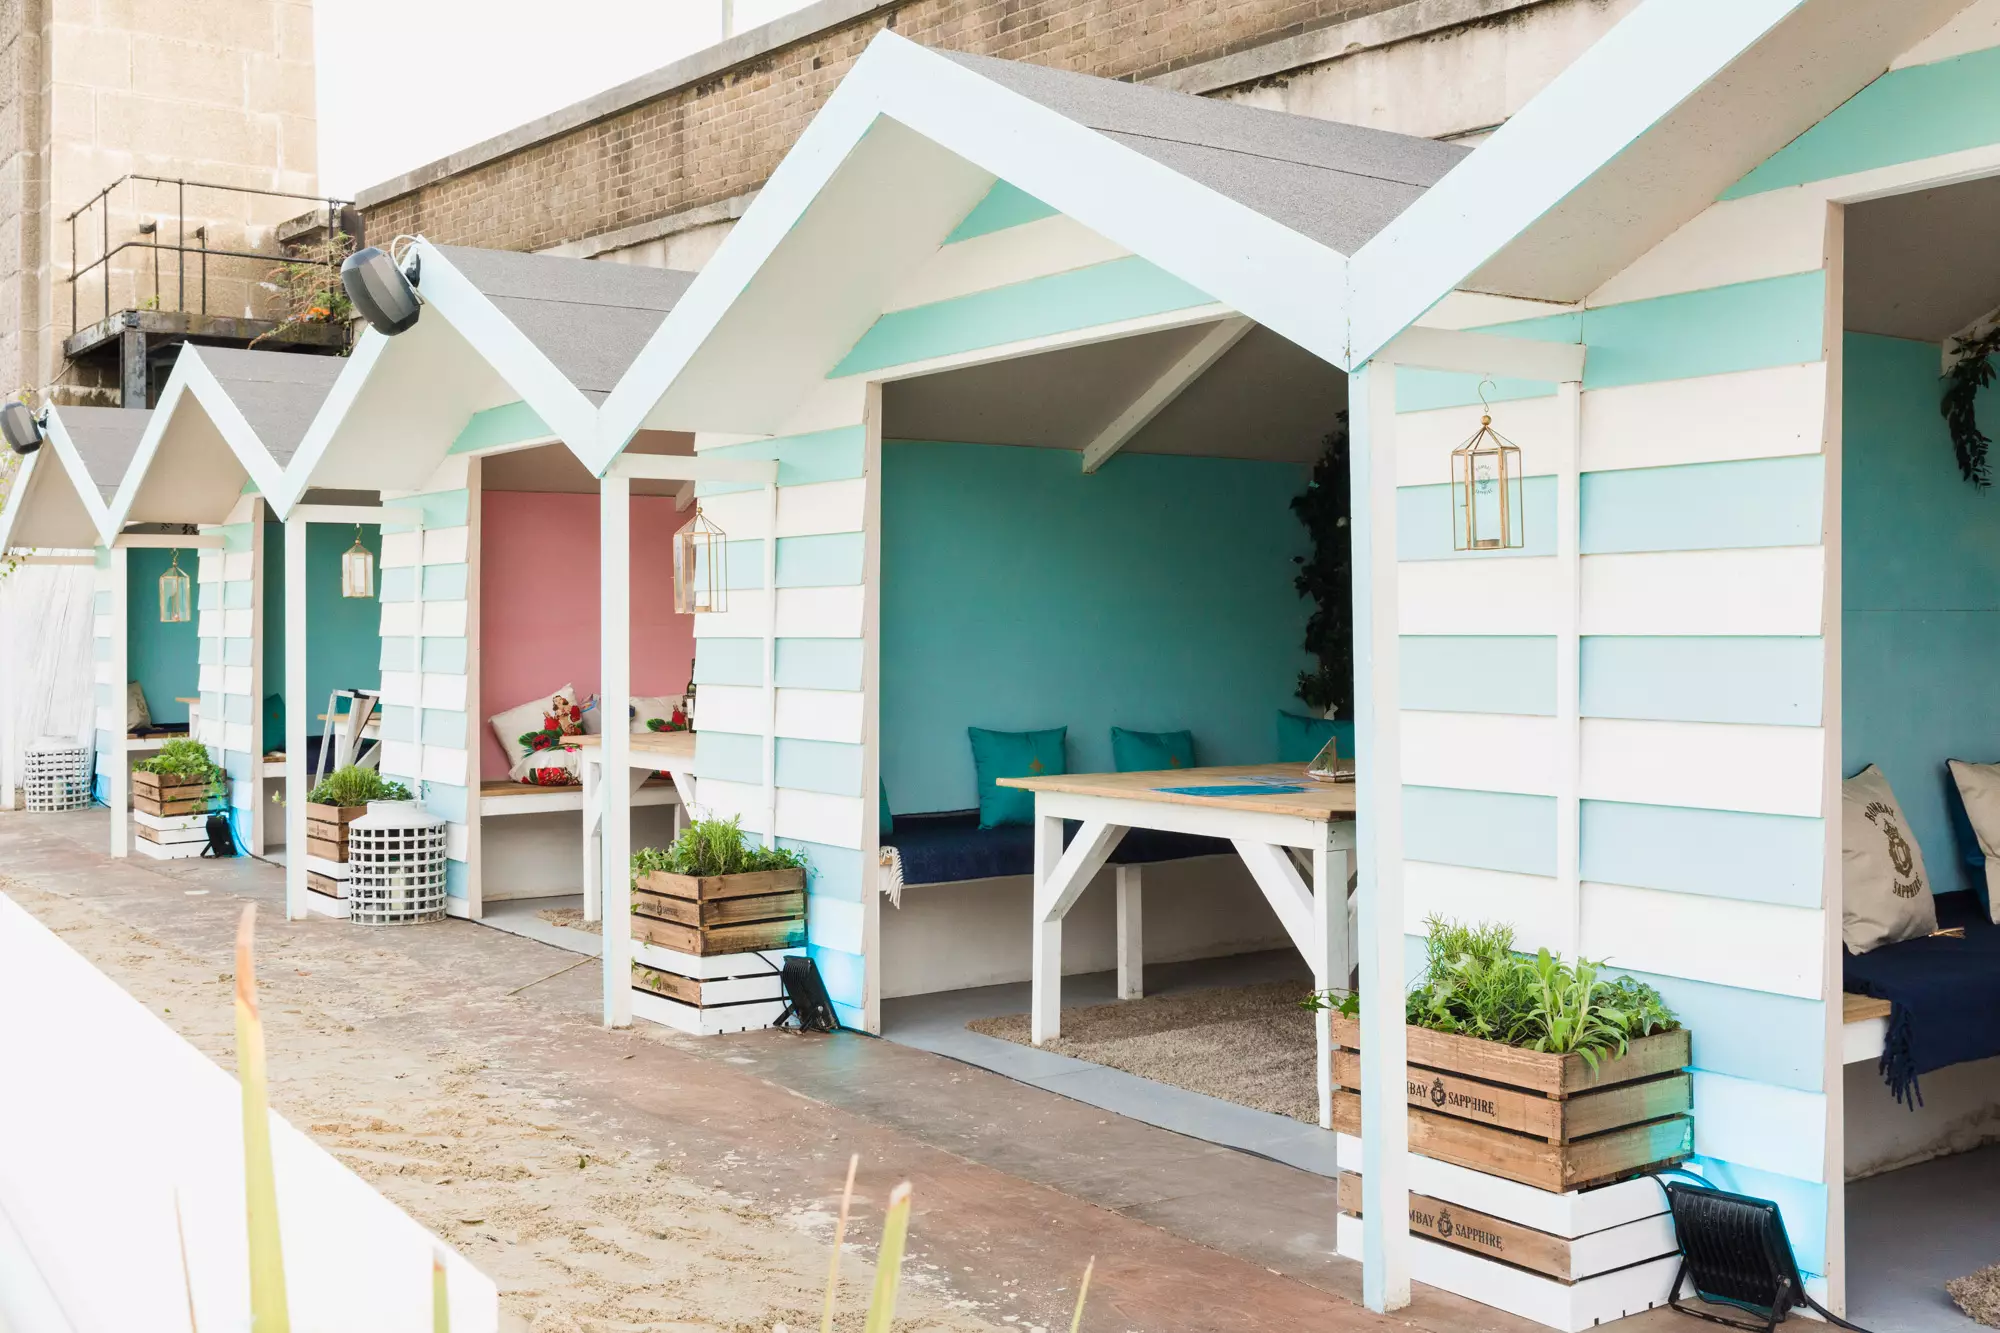 Hire a beach hut at the unusual venue from £30 for up to six guests (